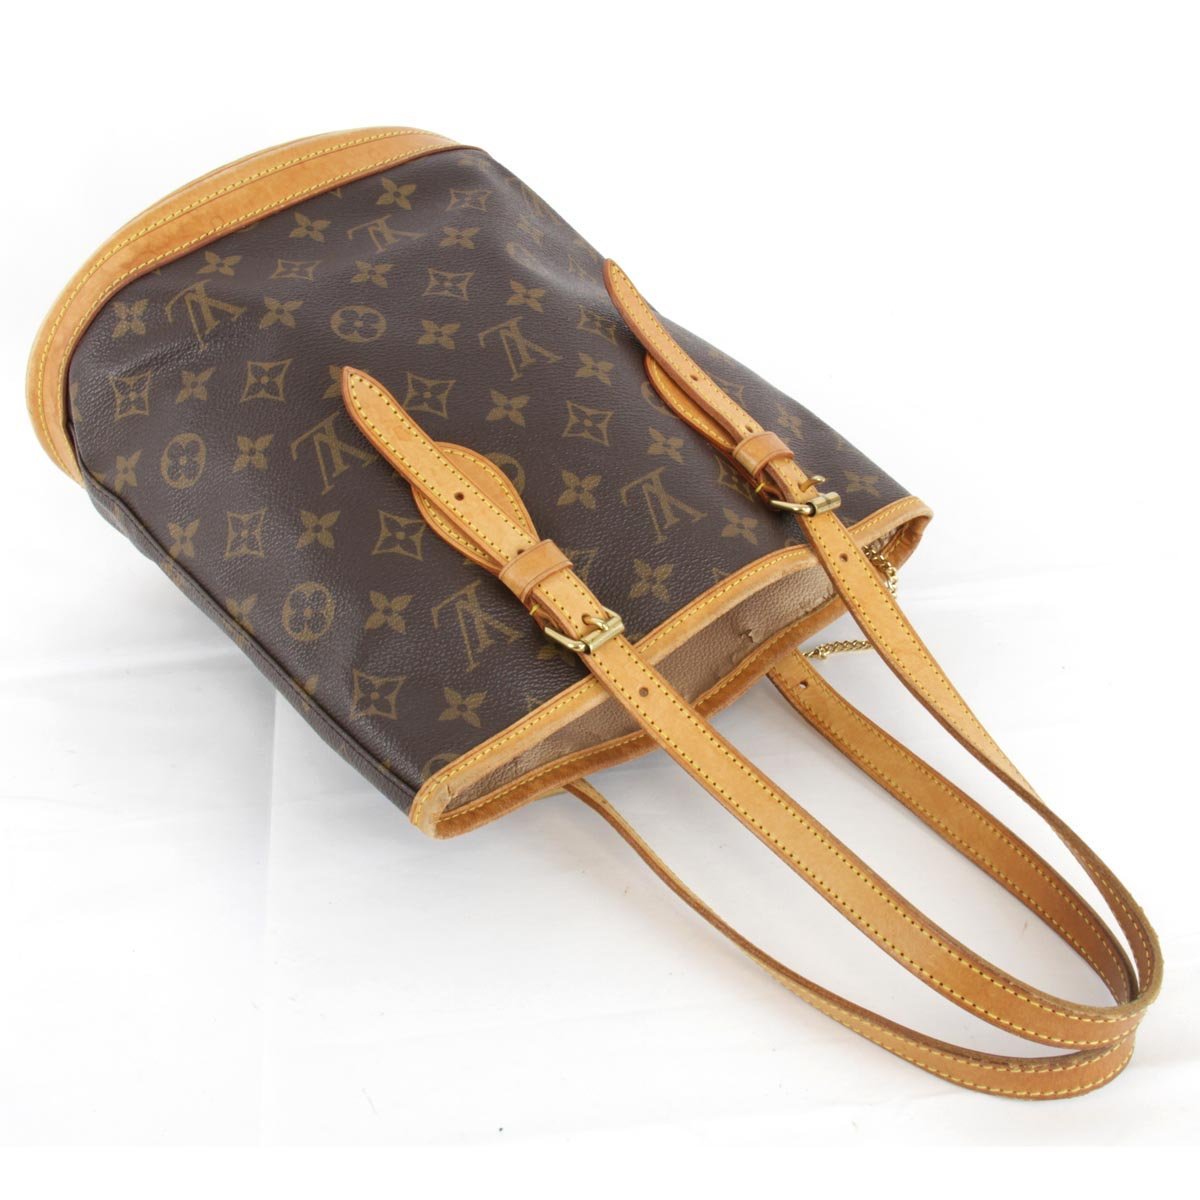 USED』 LOUIS VUITTON ルイ・ヴィトン バケットPM M42238 トートバッグ